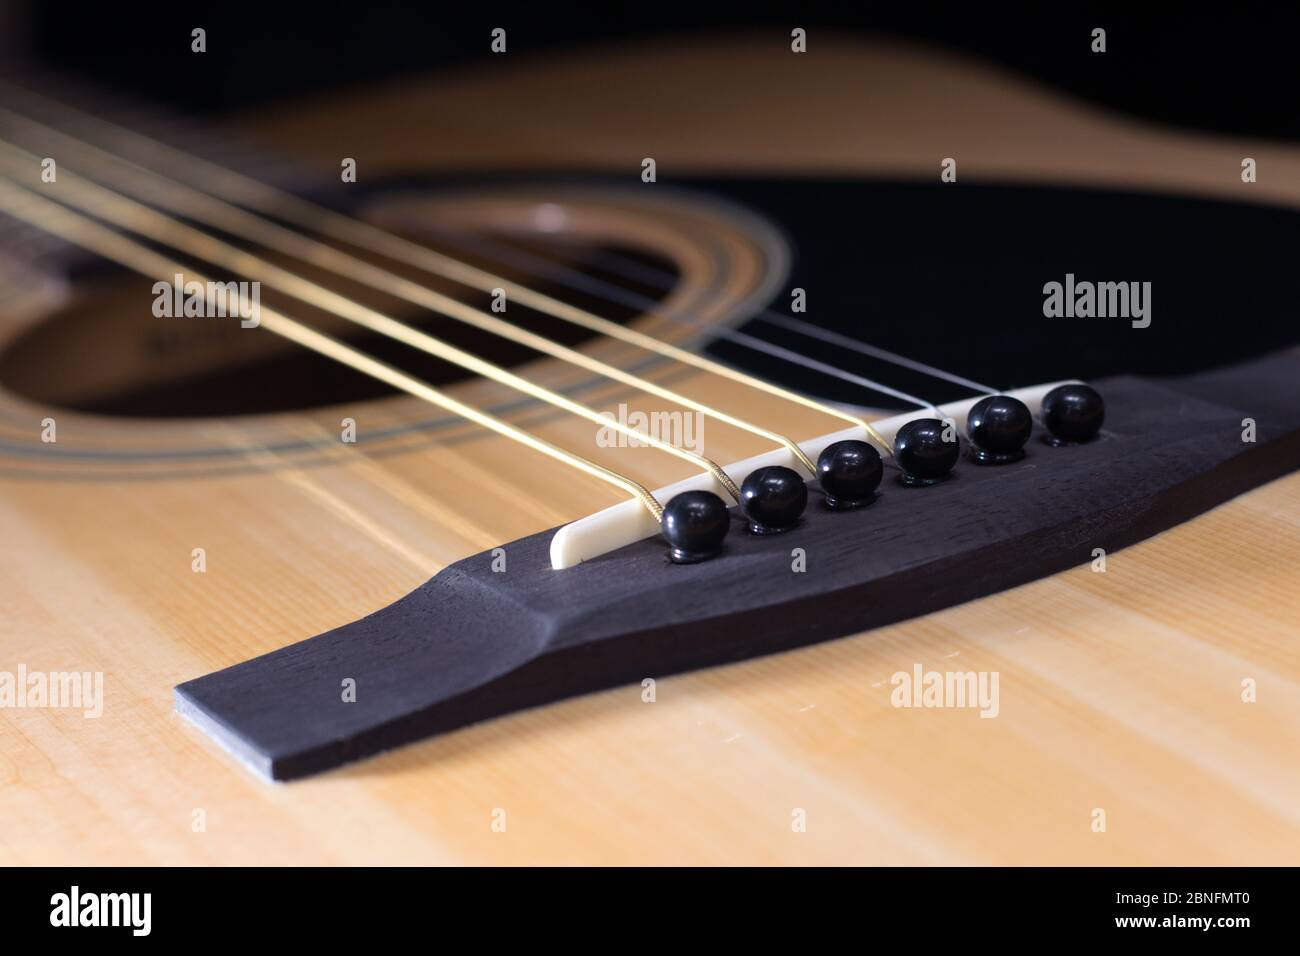 Parts of acoustic guitar close-up Stock Photo